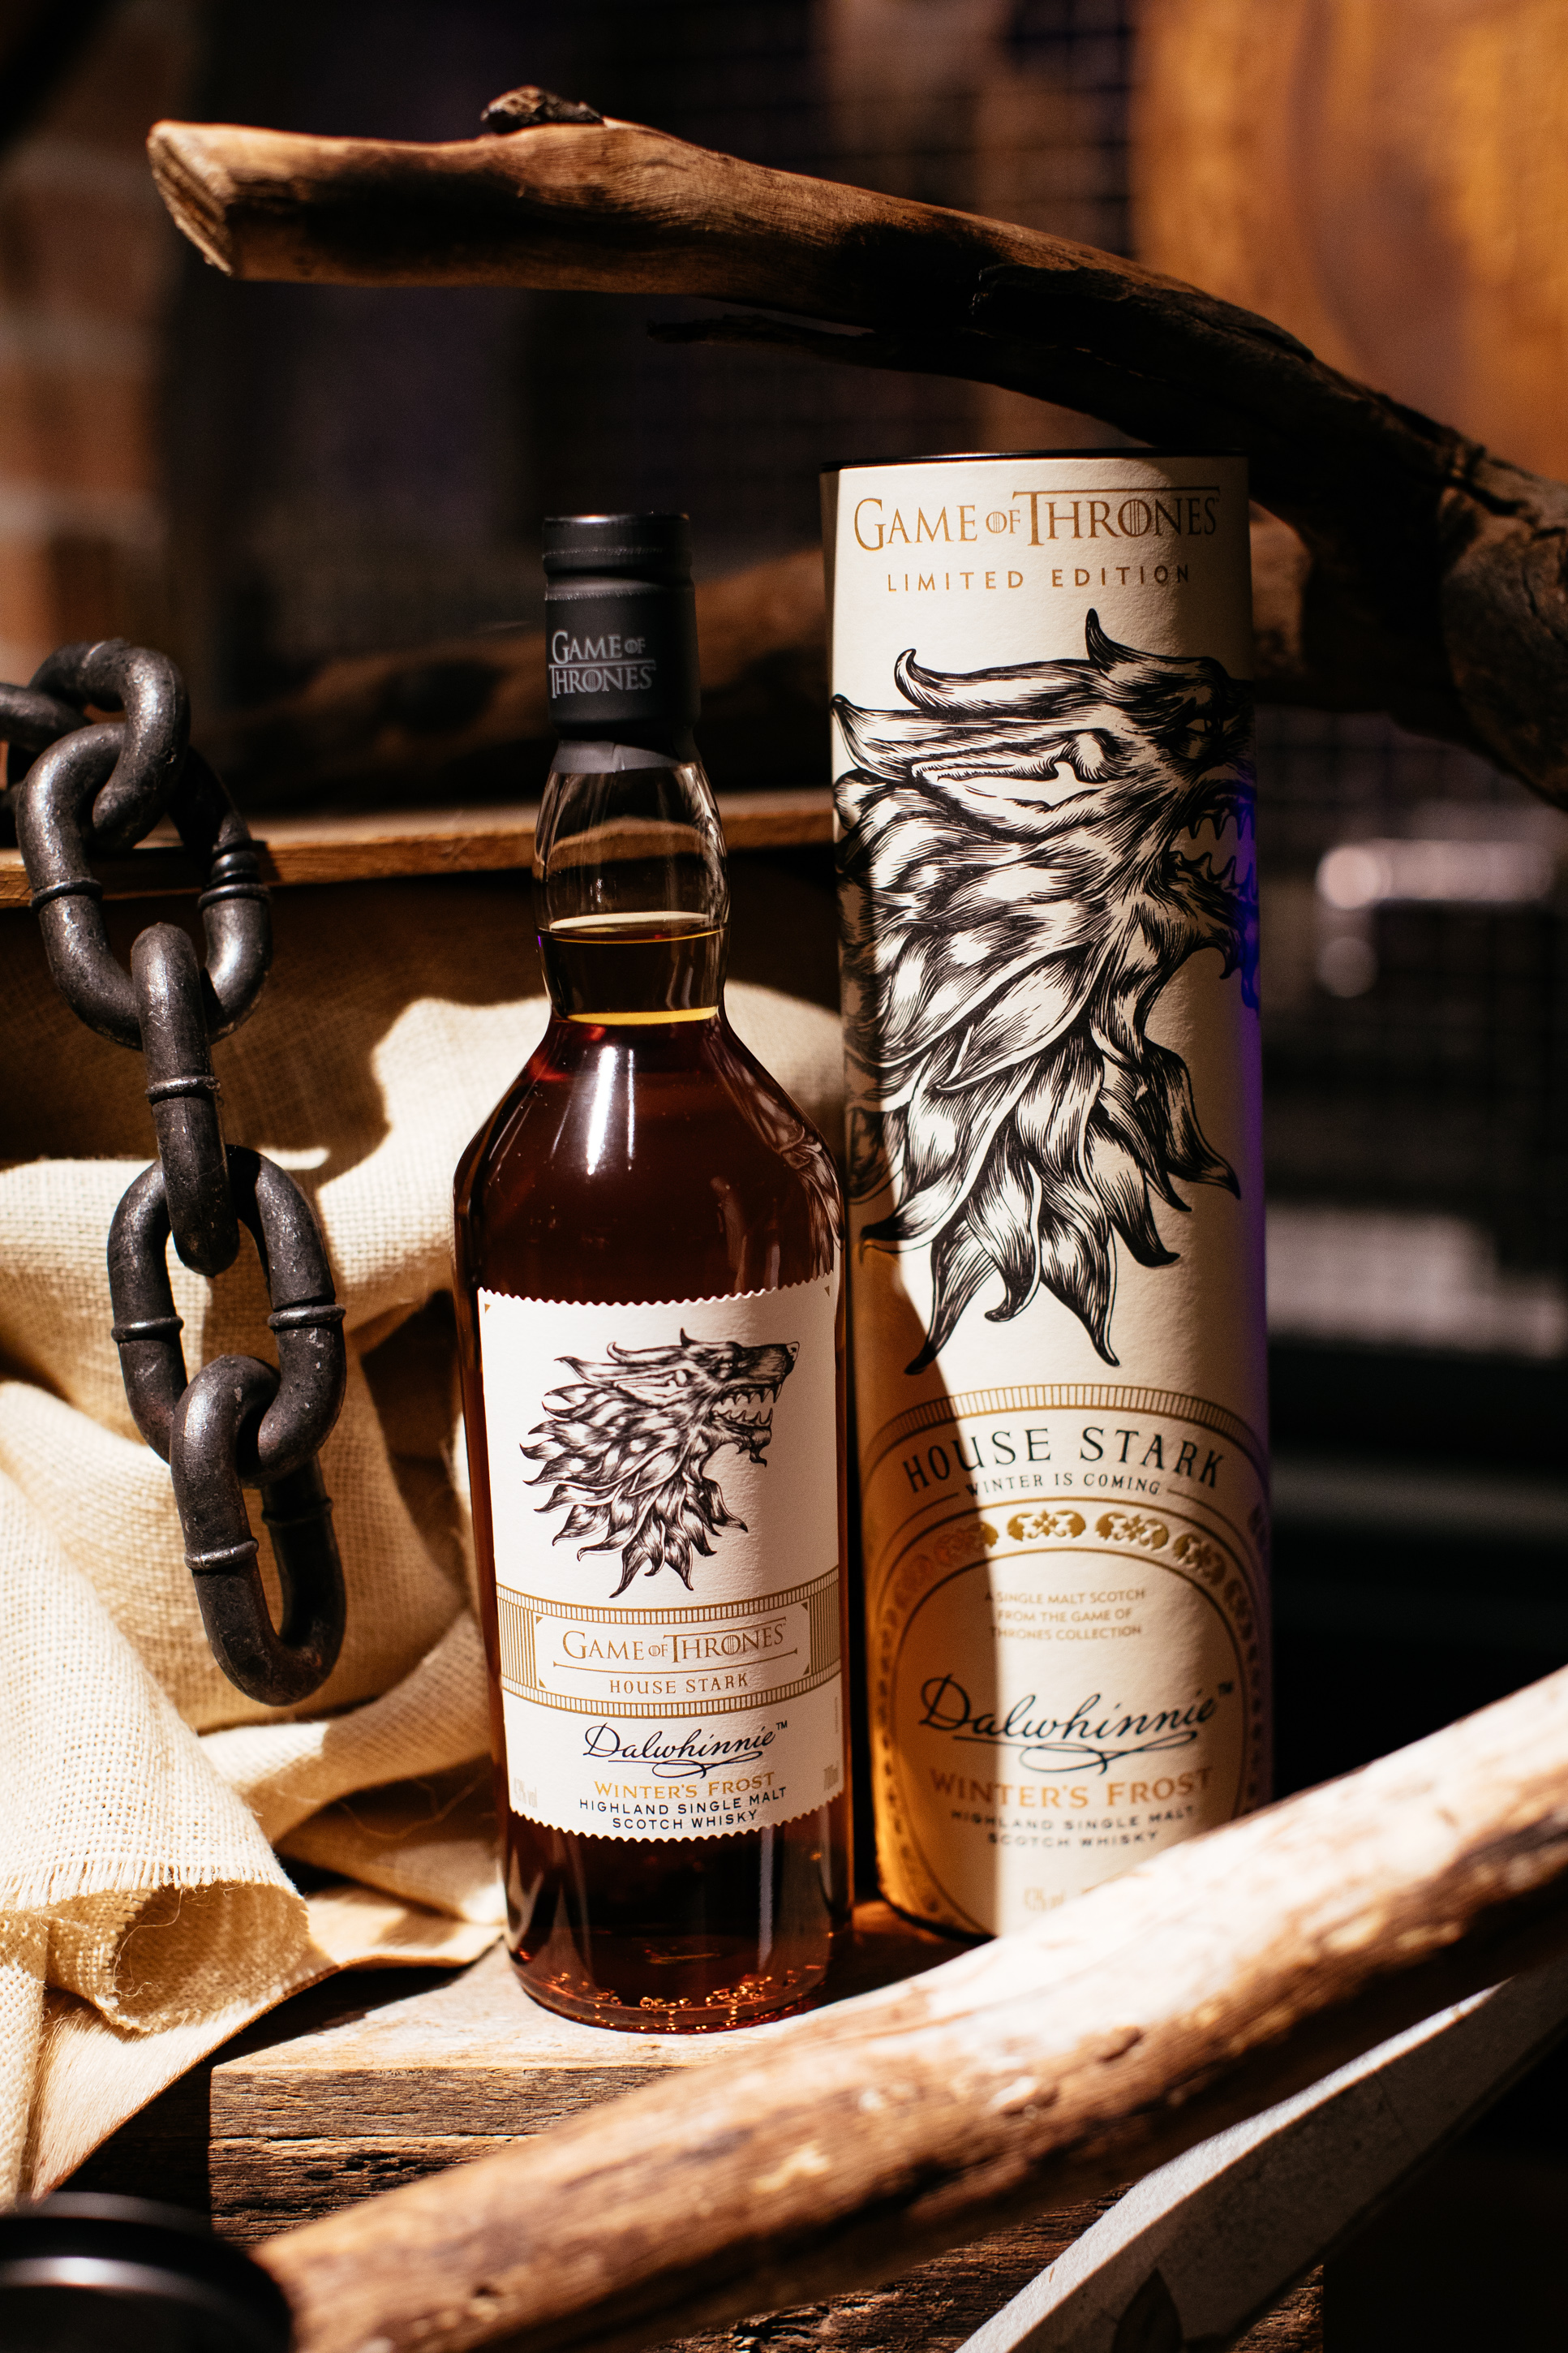 The Game Of Thrones Single Malt Scotch Whisky Collection Malt